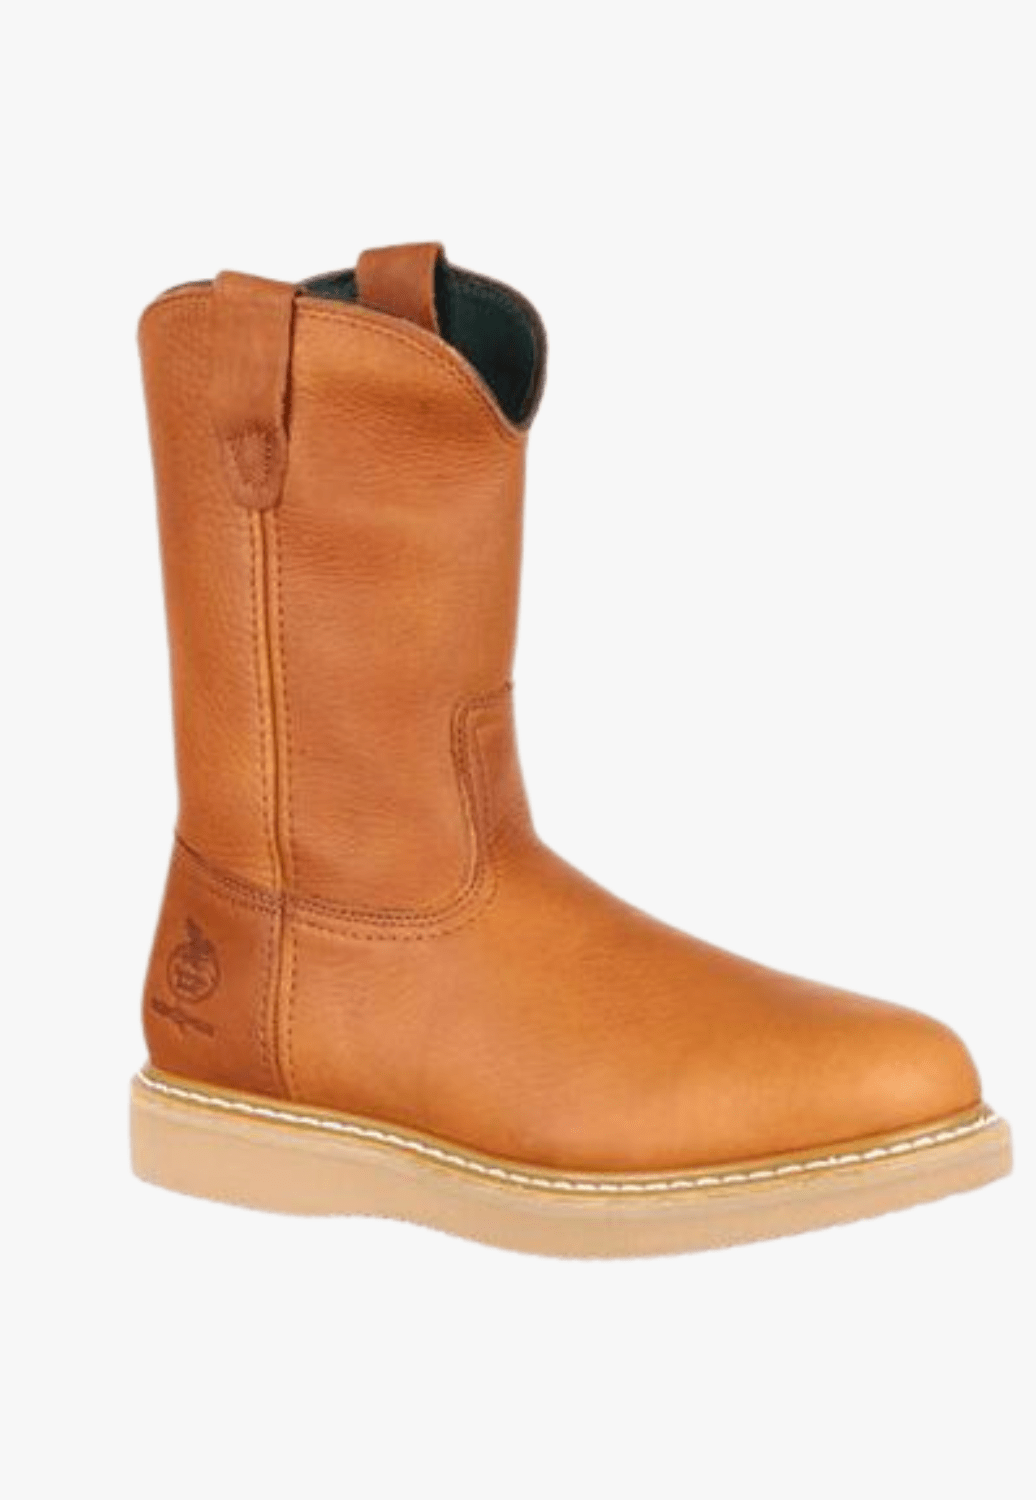 Georgia Boot WORKWEAR - Boots Non Safety Georgia Boot Soft Toe Boot